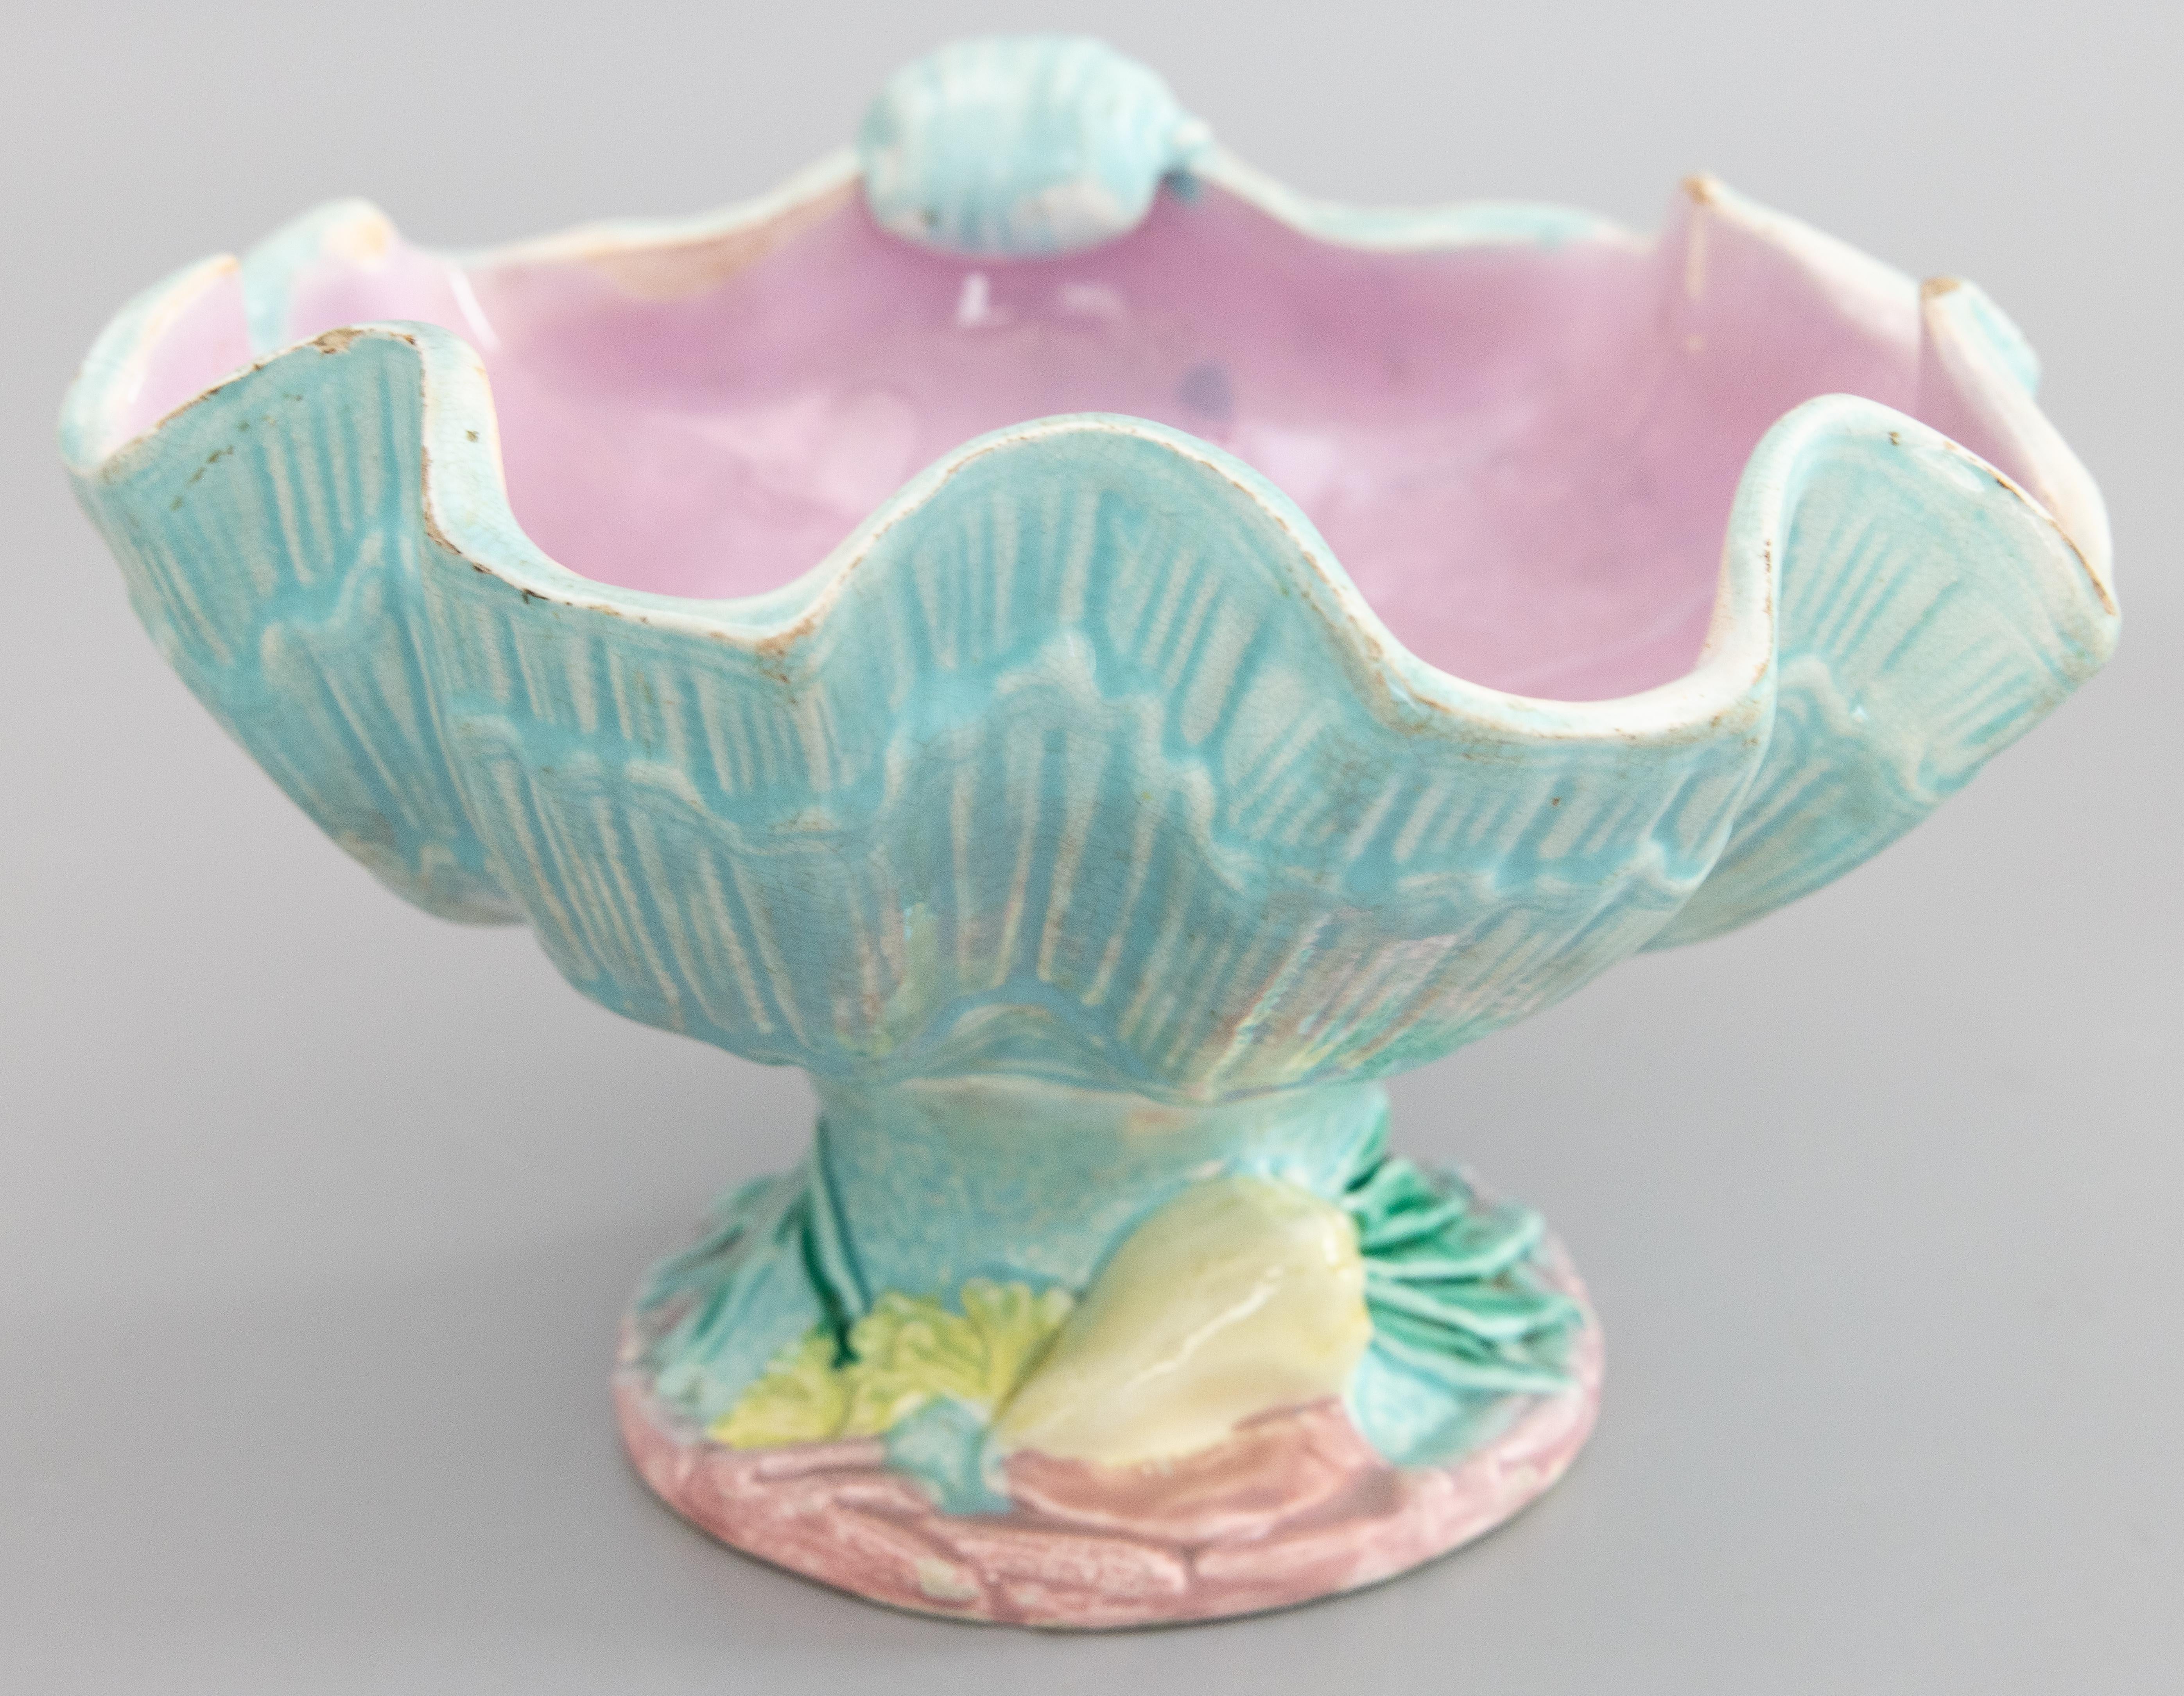 A lovely antique Victorian English majolica shell compote pedestal centerpiece by Joseph Holdcroft, circa 1880. The shell exterior is a turquoise blue in the shape of a giant clam, with a mulberry pink interior. The bowl sits on a 2